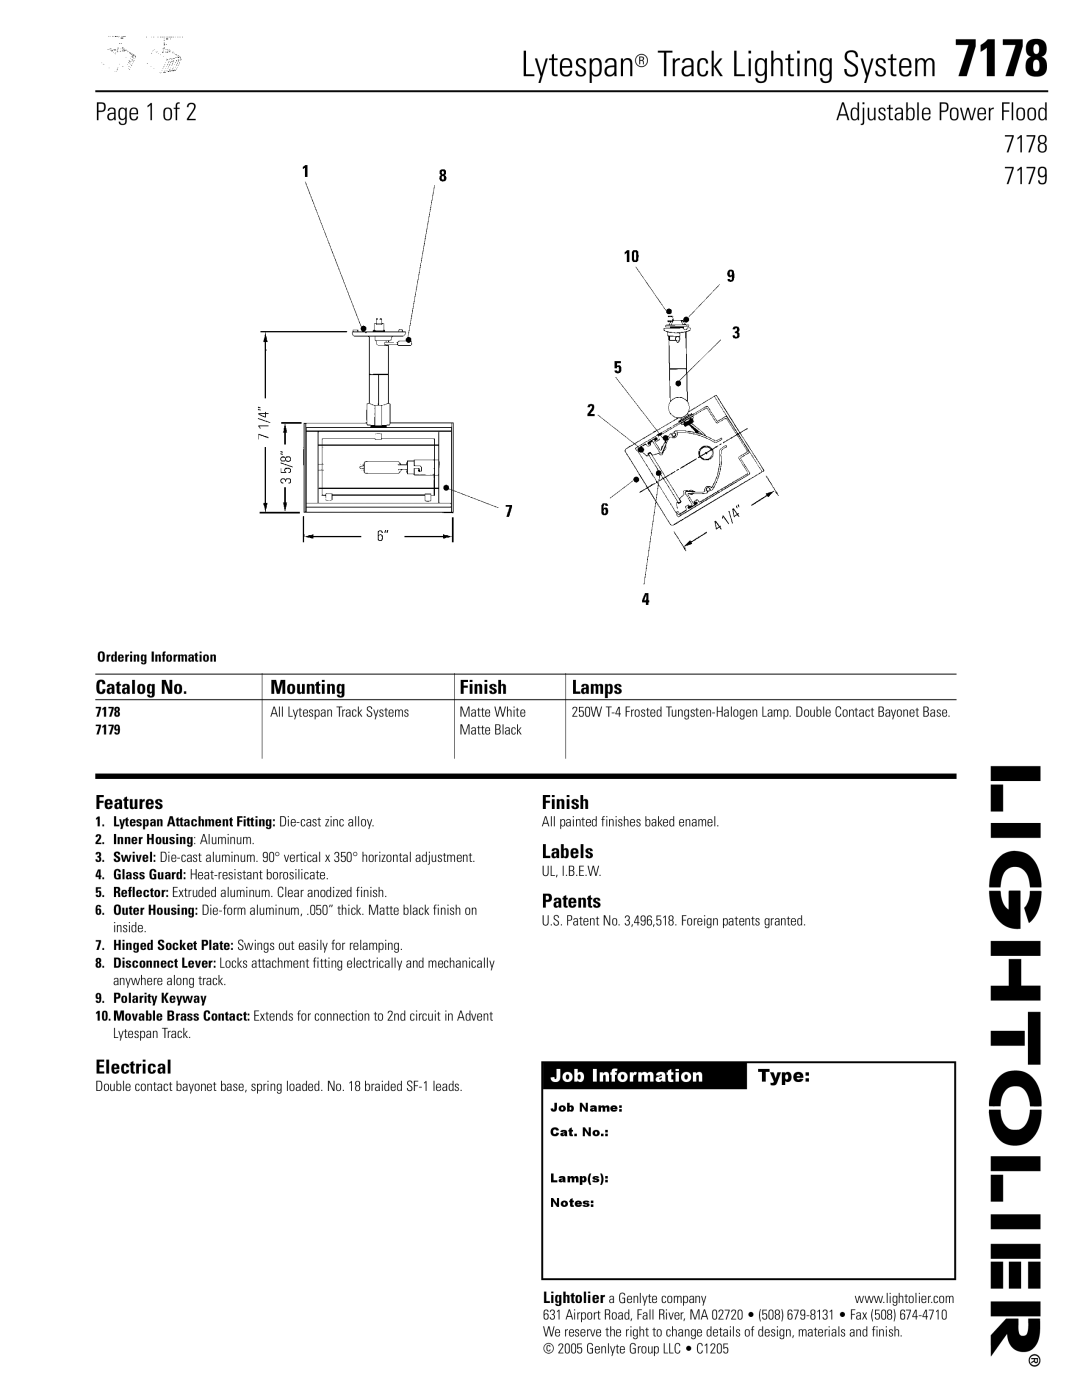 Lightolier 7178 manual Page 1 of, Adjustable Power Flood, 7179, Catalog No, Mounting, Finish, Lamps, Features, Labels 